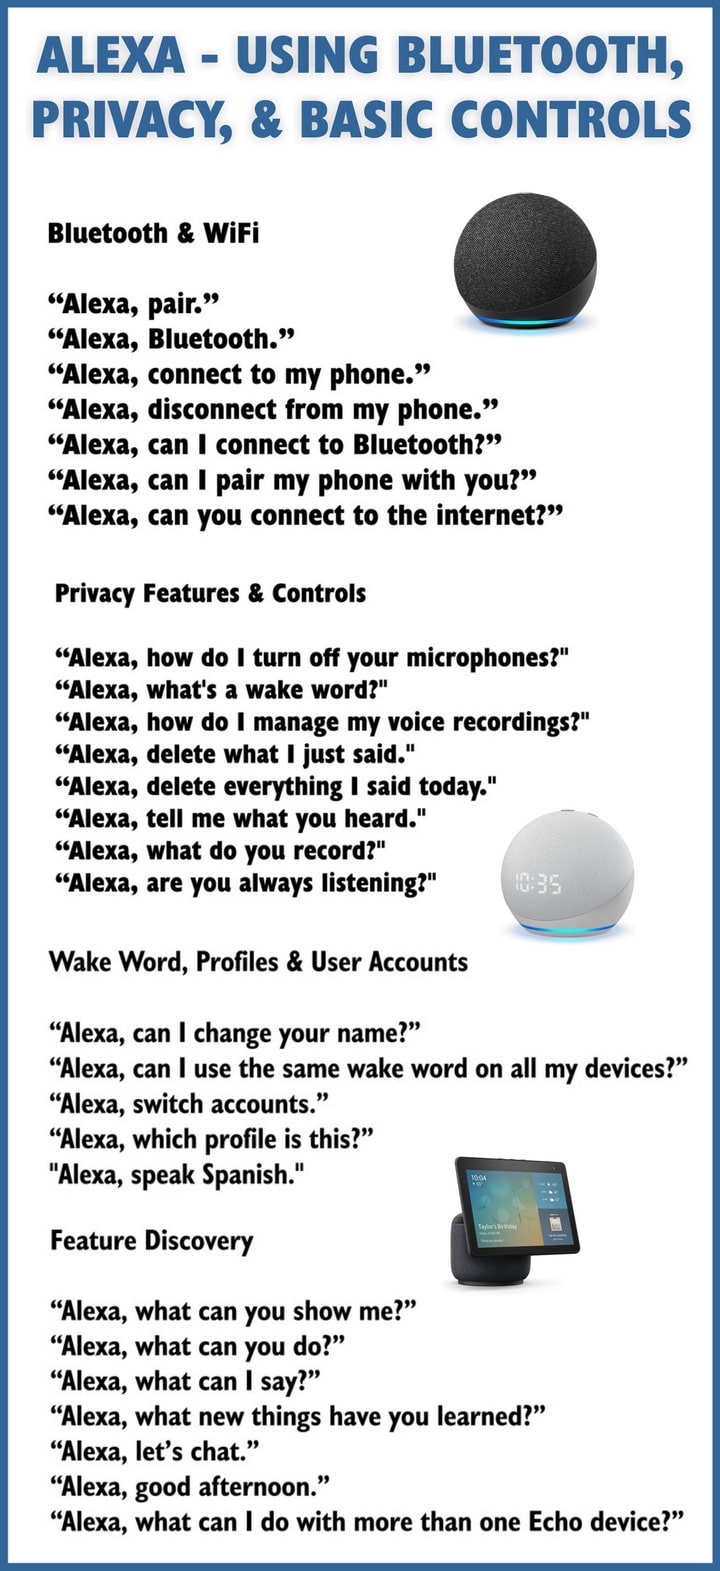 Amazon Alexa - How to control bluetooth privacy and basic controls